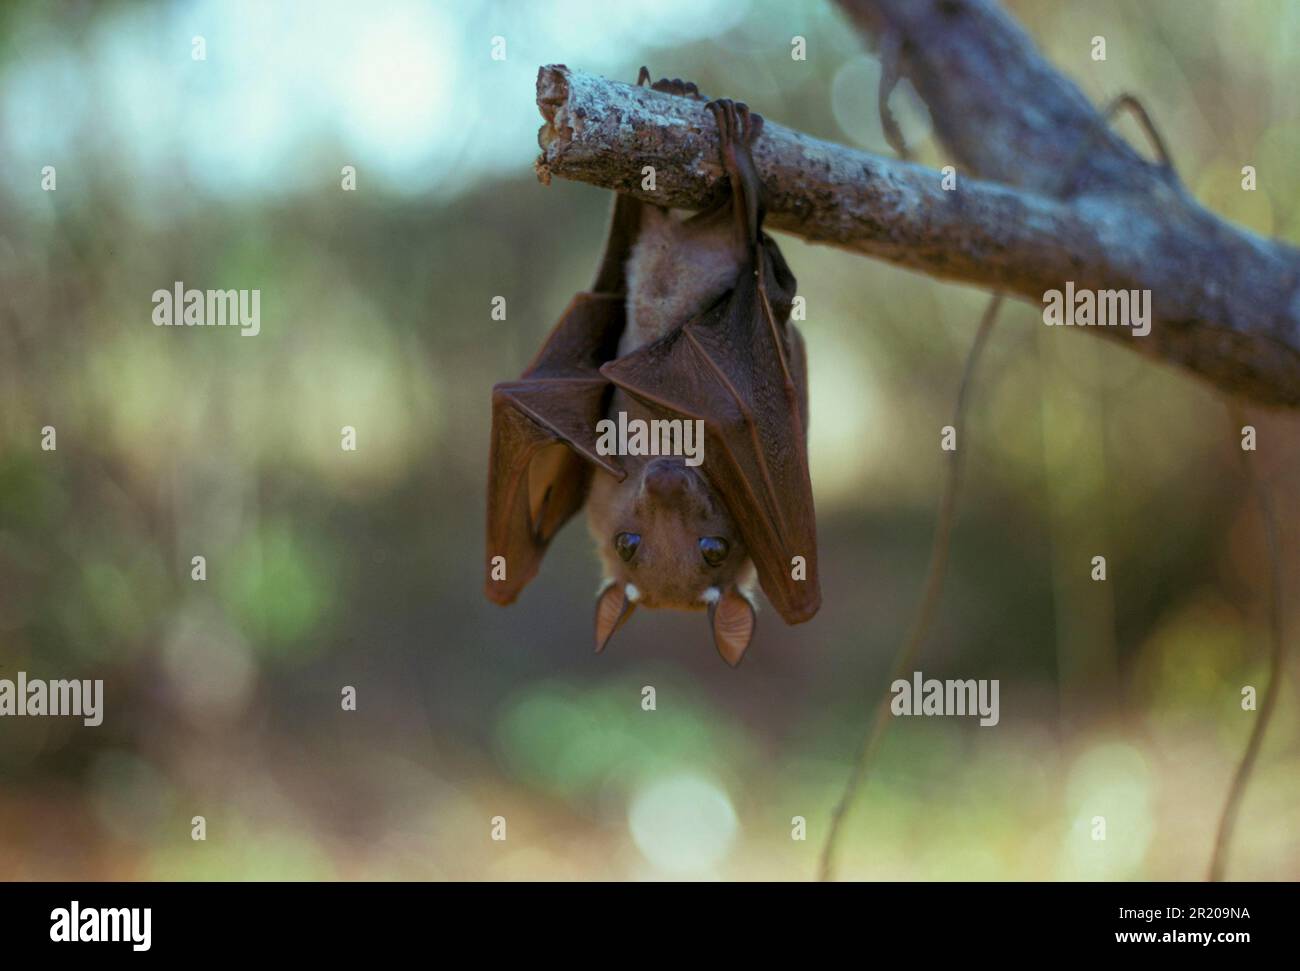 Wahlberg's Fruit Bat, Wahlberg's Fruit Bat, Bats, Mammals, Animals, Wahlberg's Fruit Bat (Epompohorus wahlbergi) Hanging from branch (S) Stock Photo